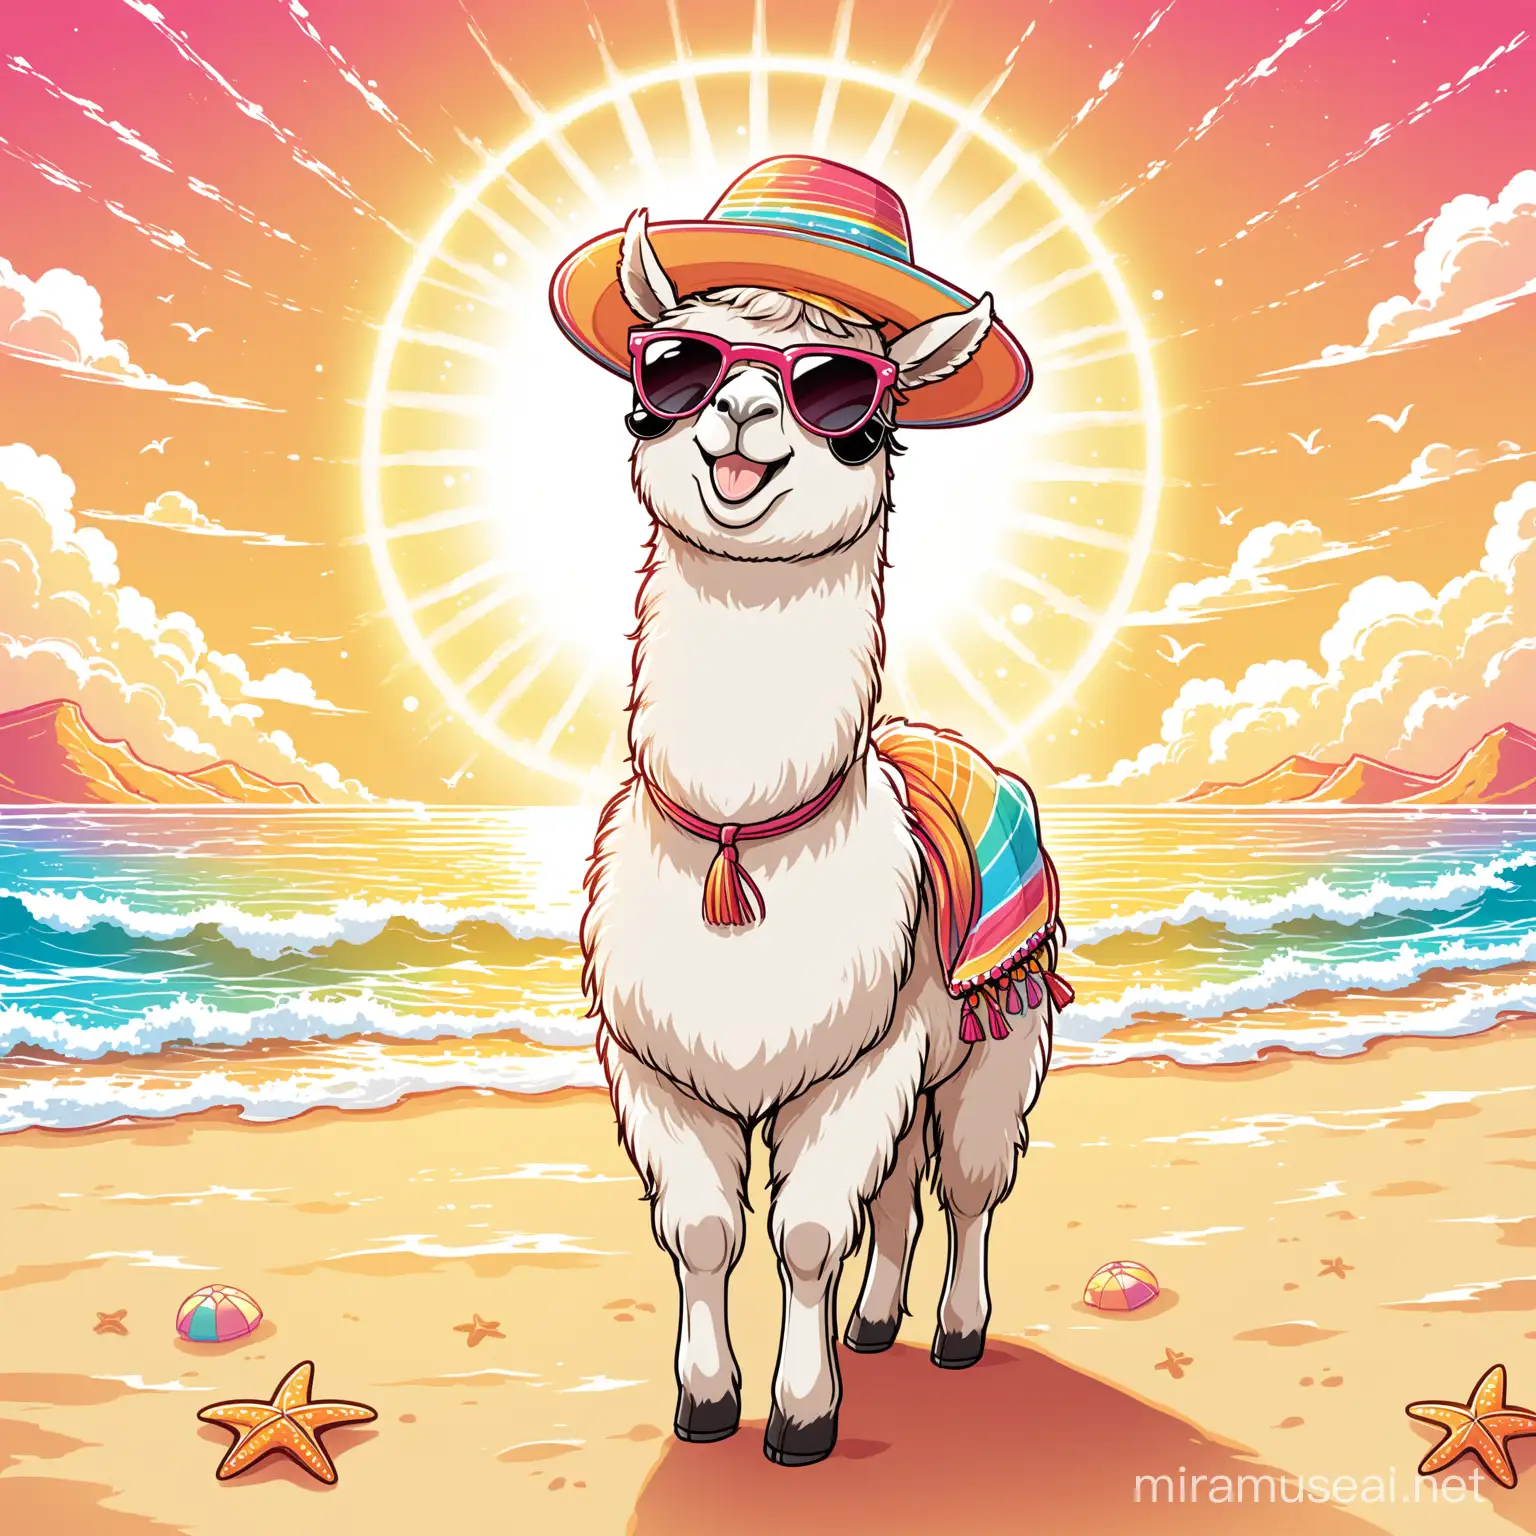 Cheerful Summer Llama Vector Illustration with Colorful Hat and Sunglasses